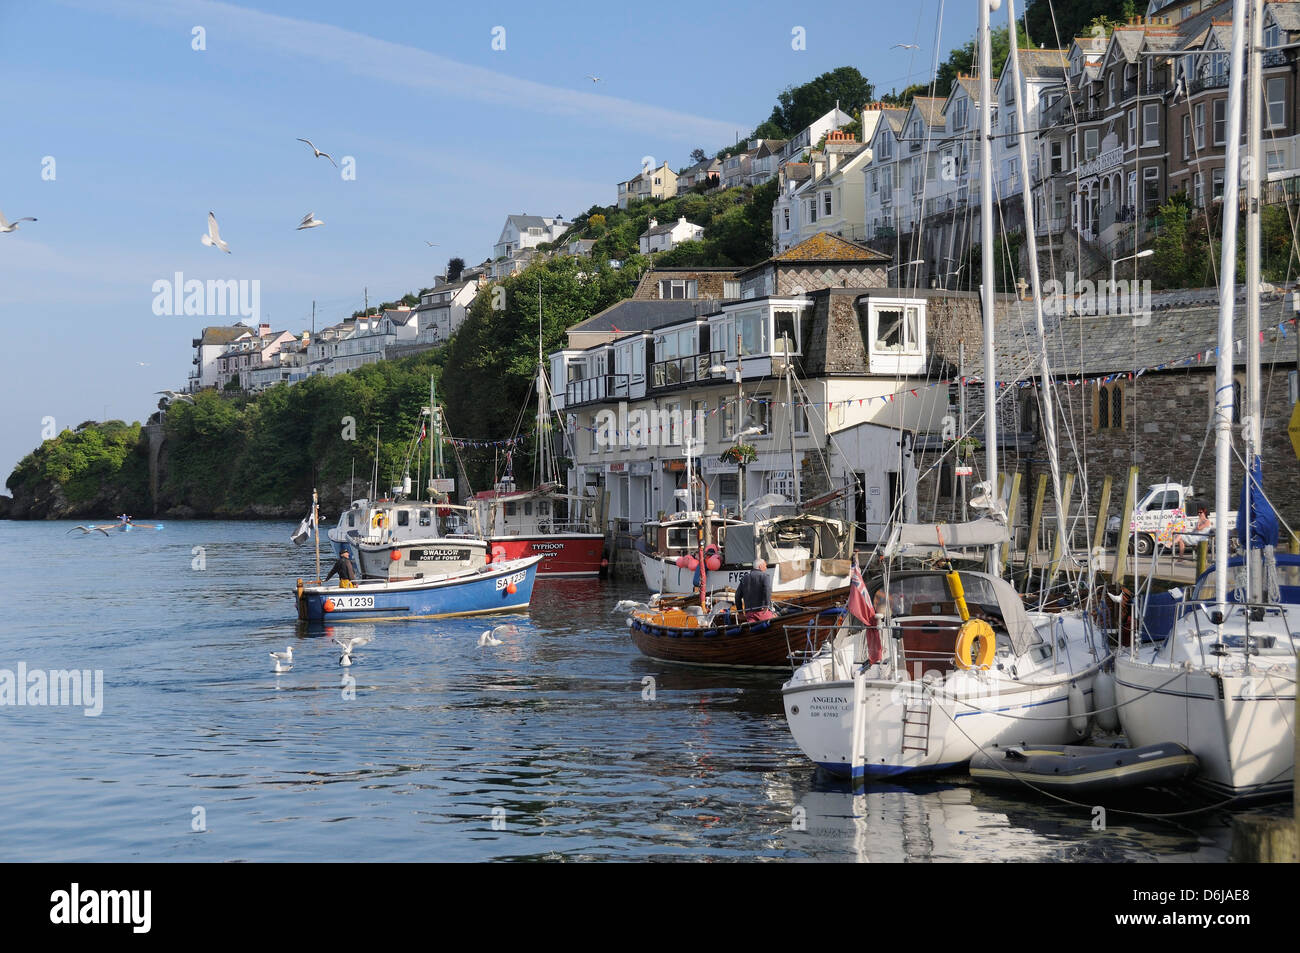 Fishing boat coming in to moor alongside other fishing boats and sailing yachts in Looe harbour, Cornwall, England, UK Stock Photo